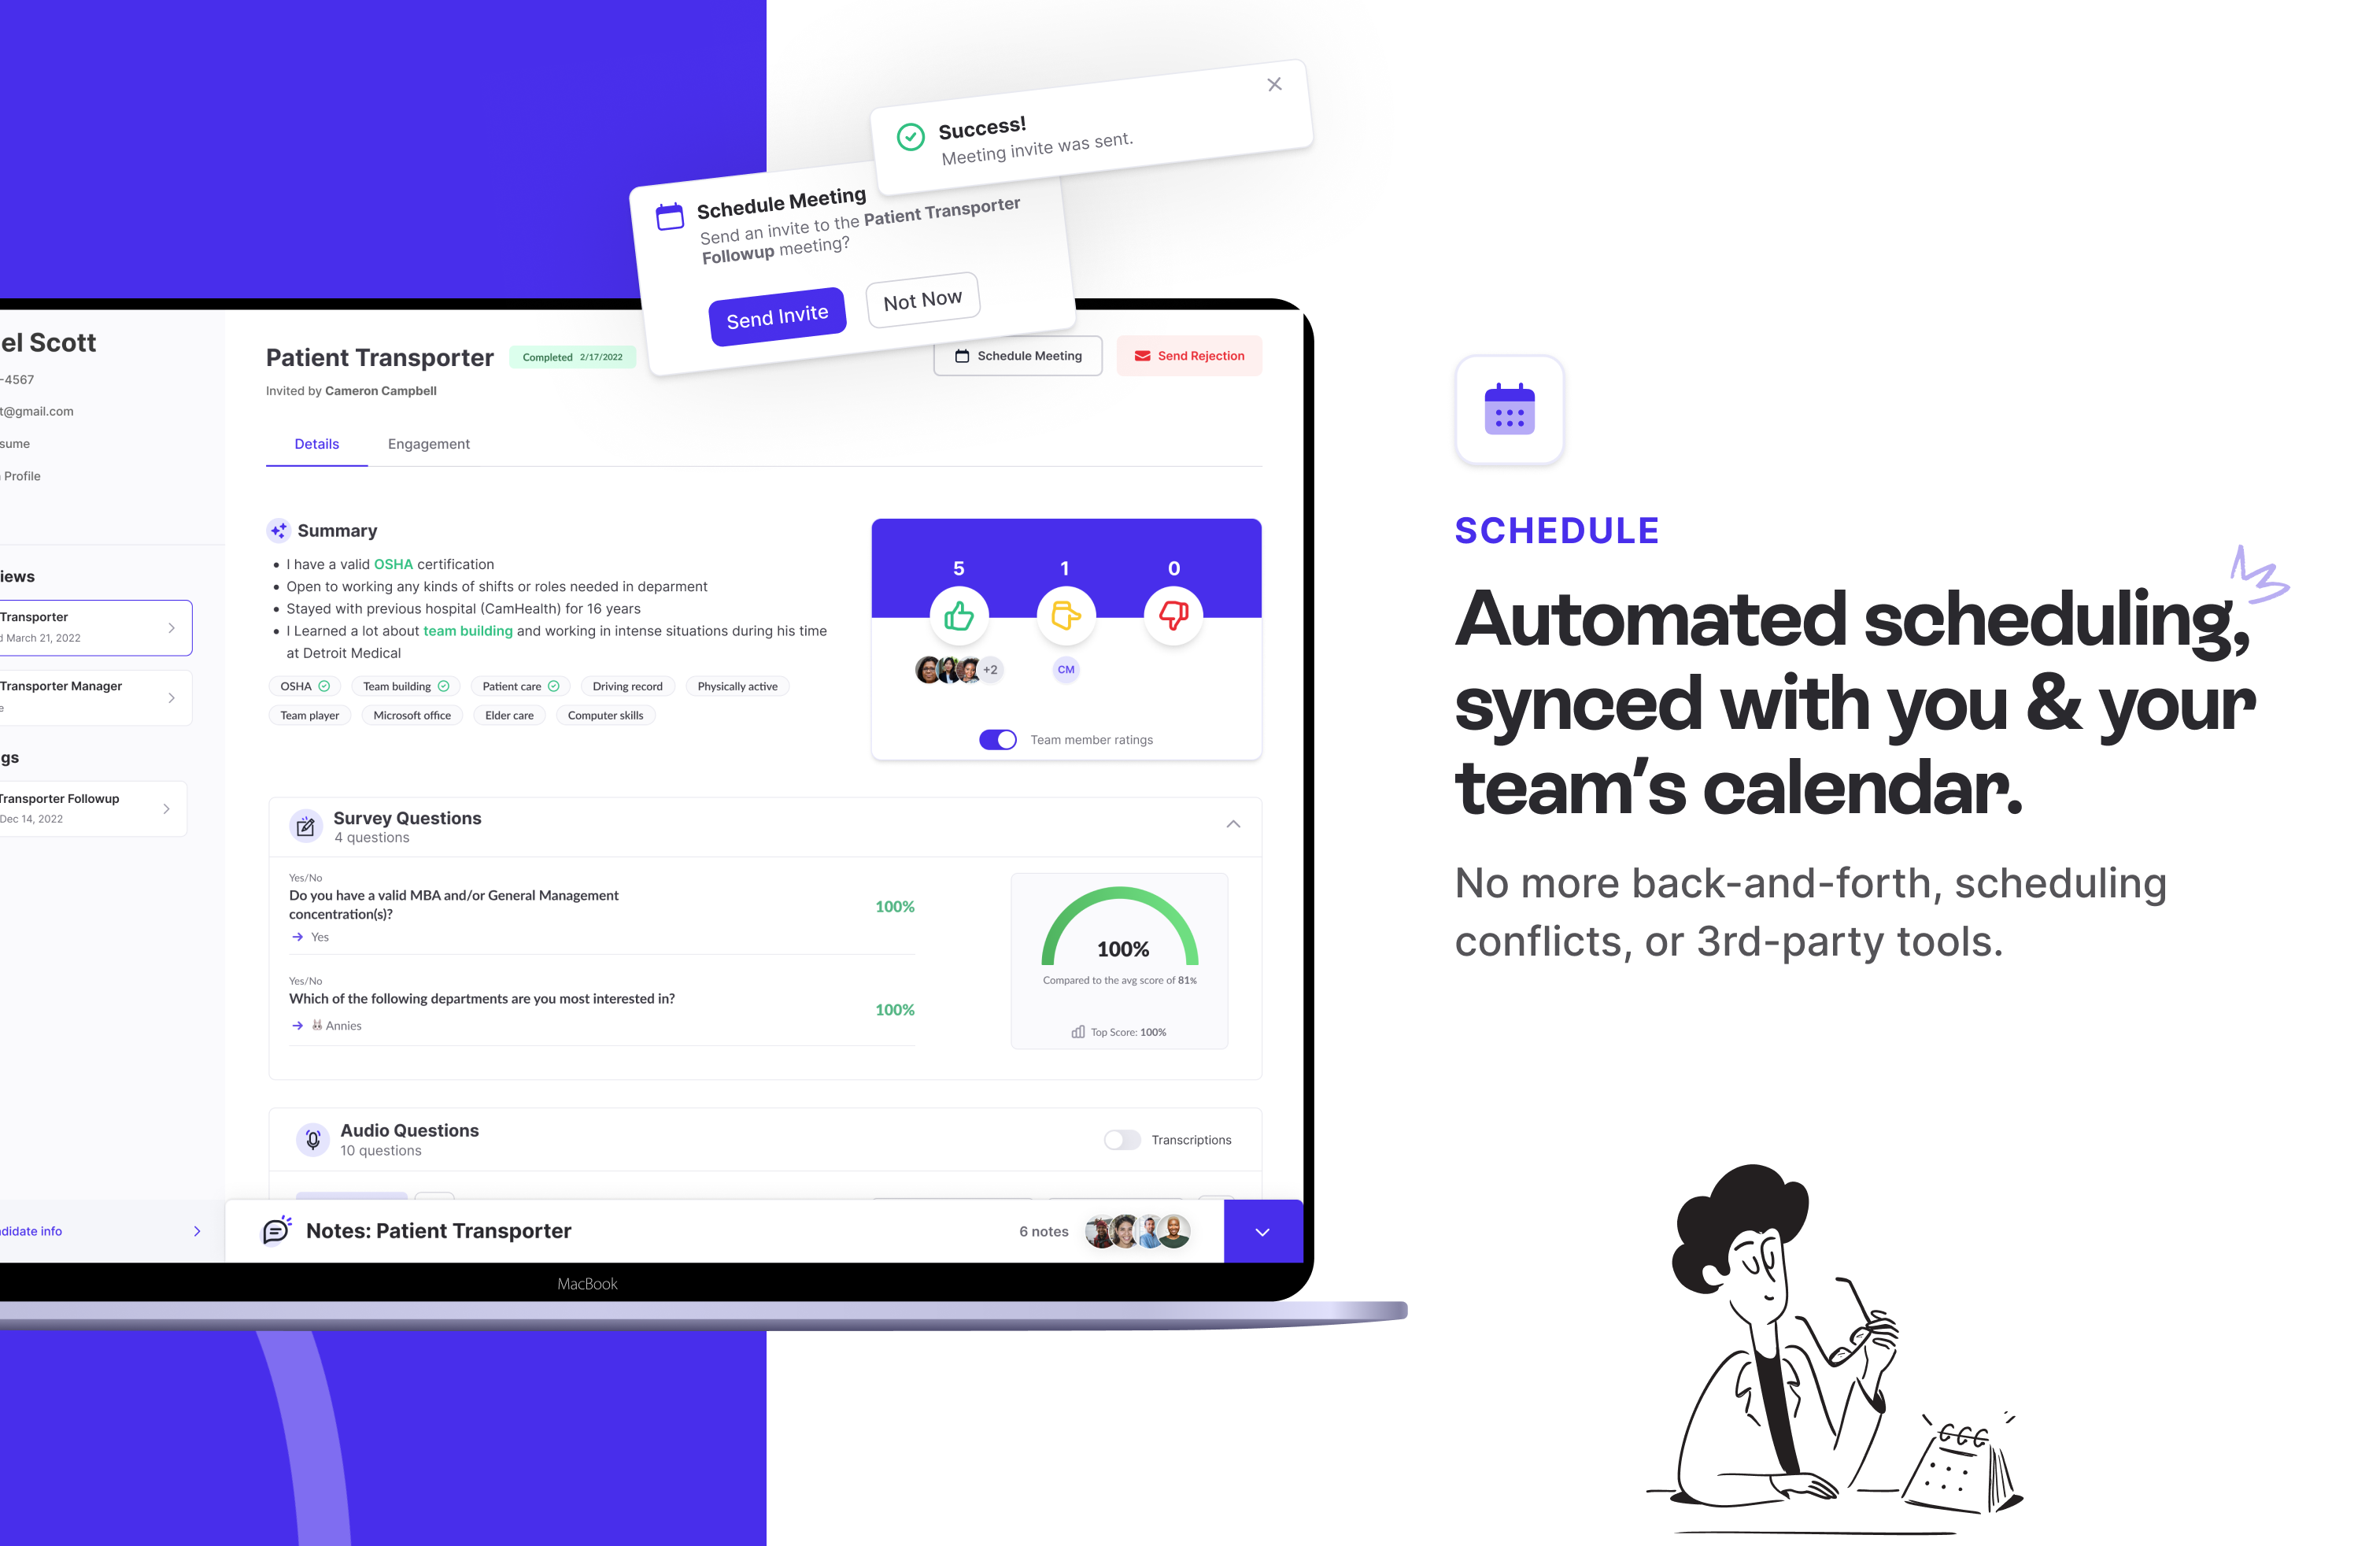 Automated scheduling, synced with you and your team's calendar.